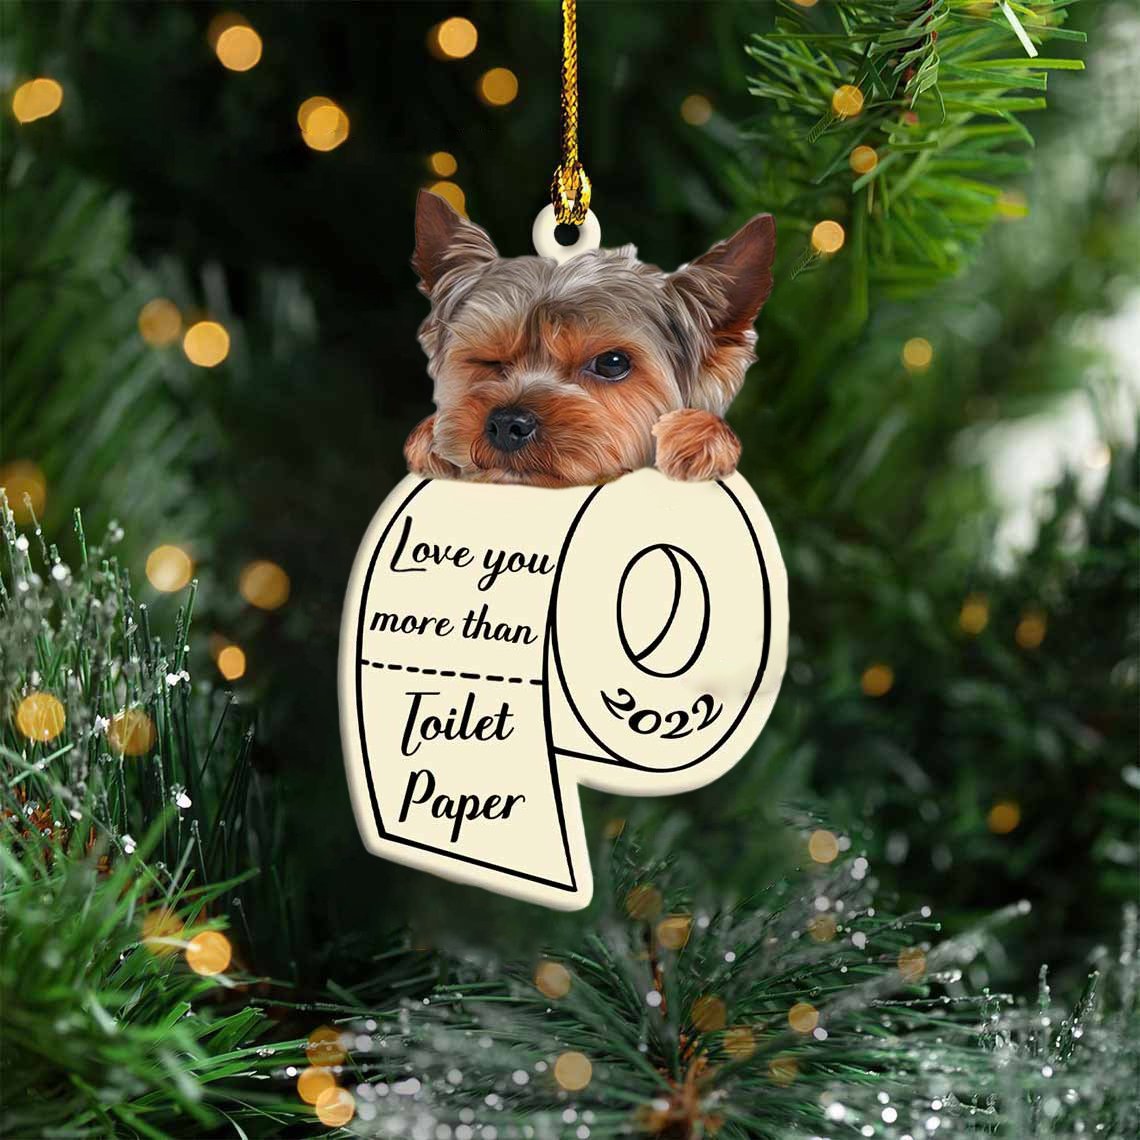 Yorkshire Terrier Love You More Than Toilet Paper 2022 Hanging Ornament